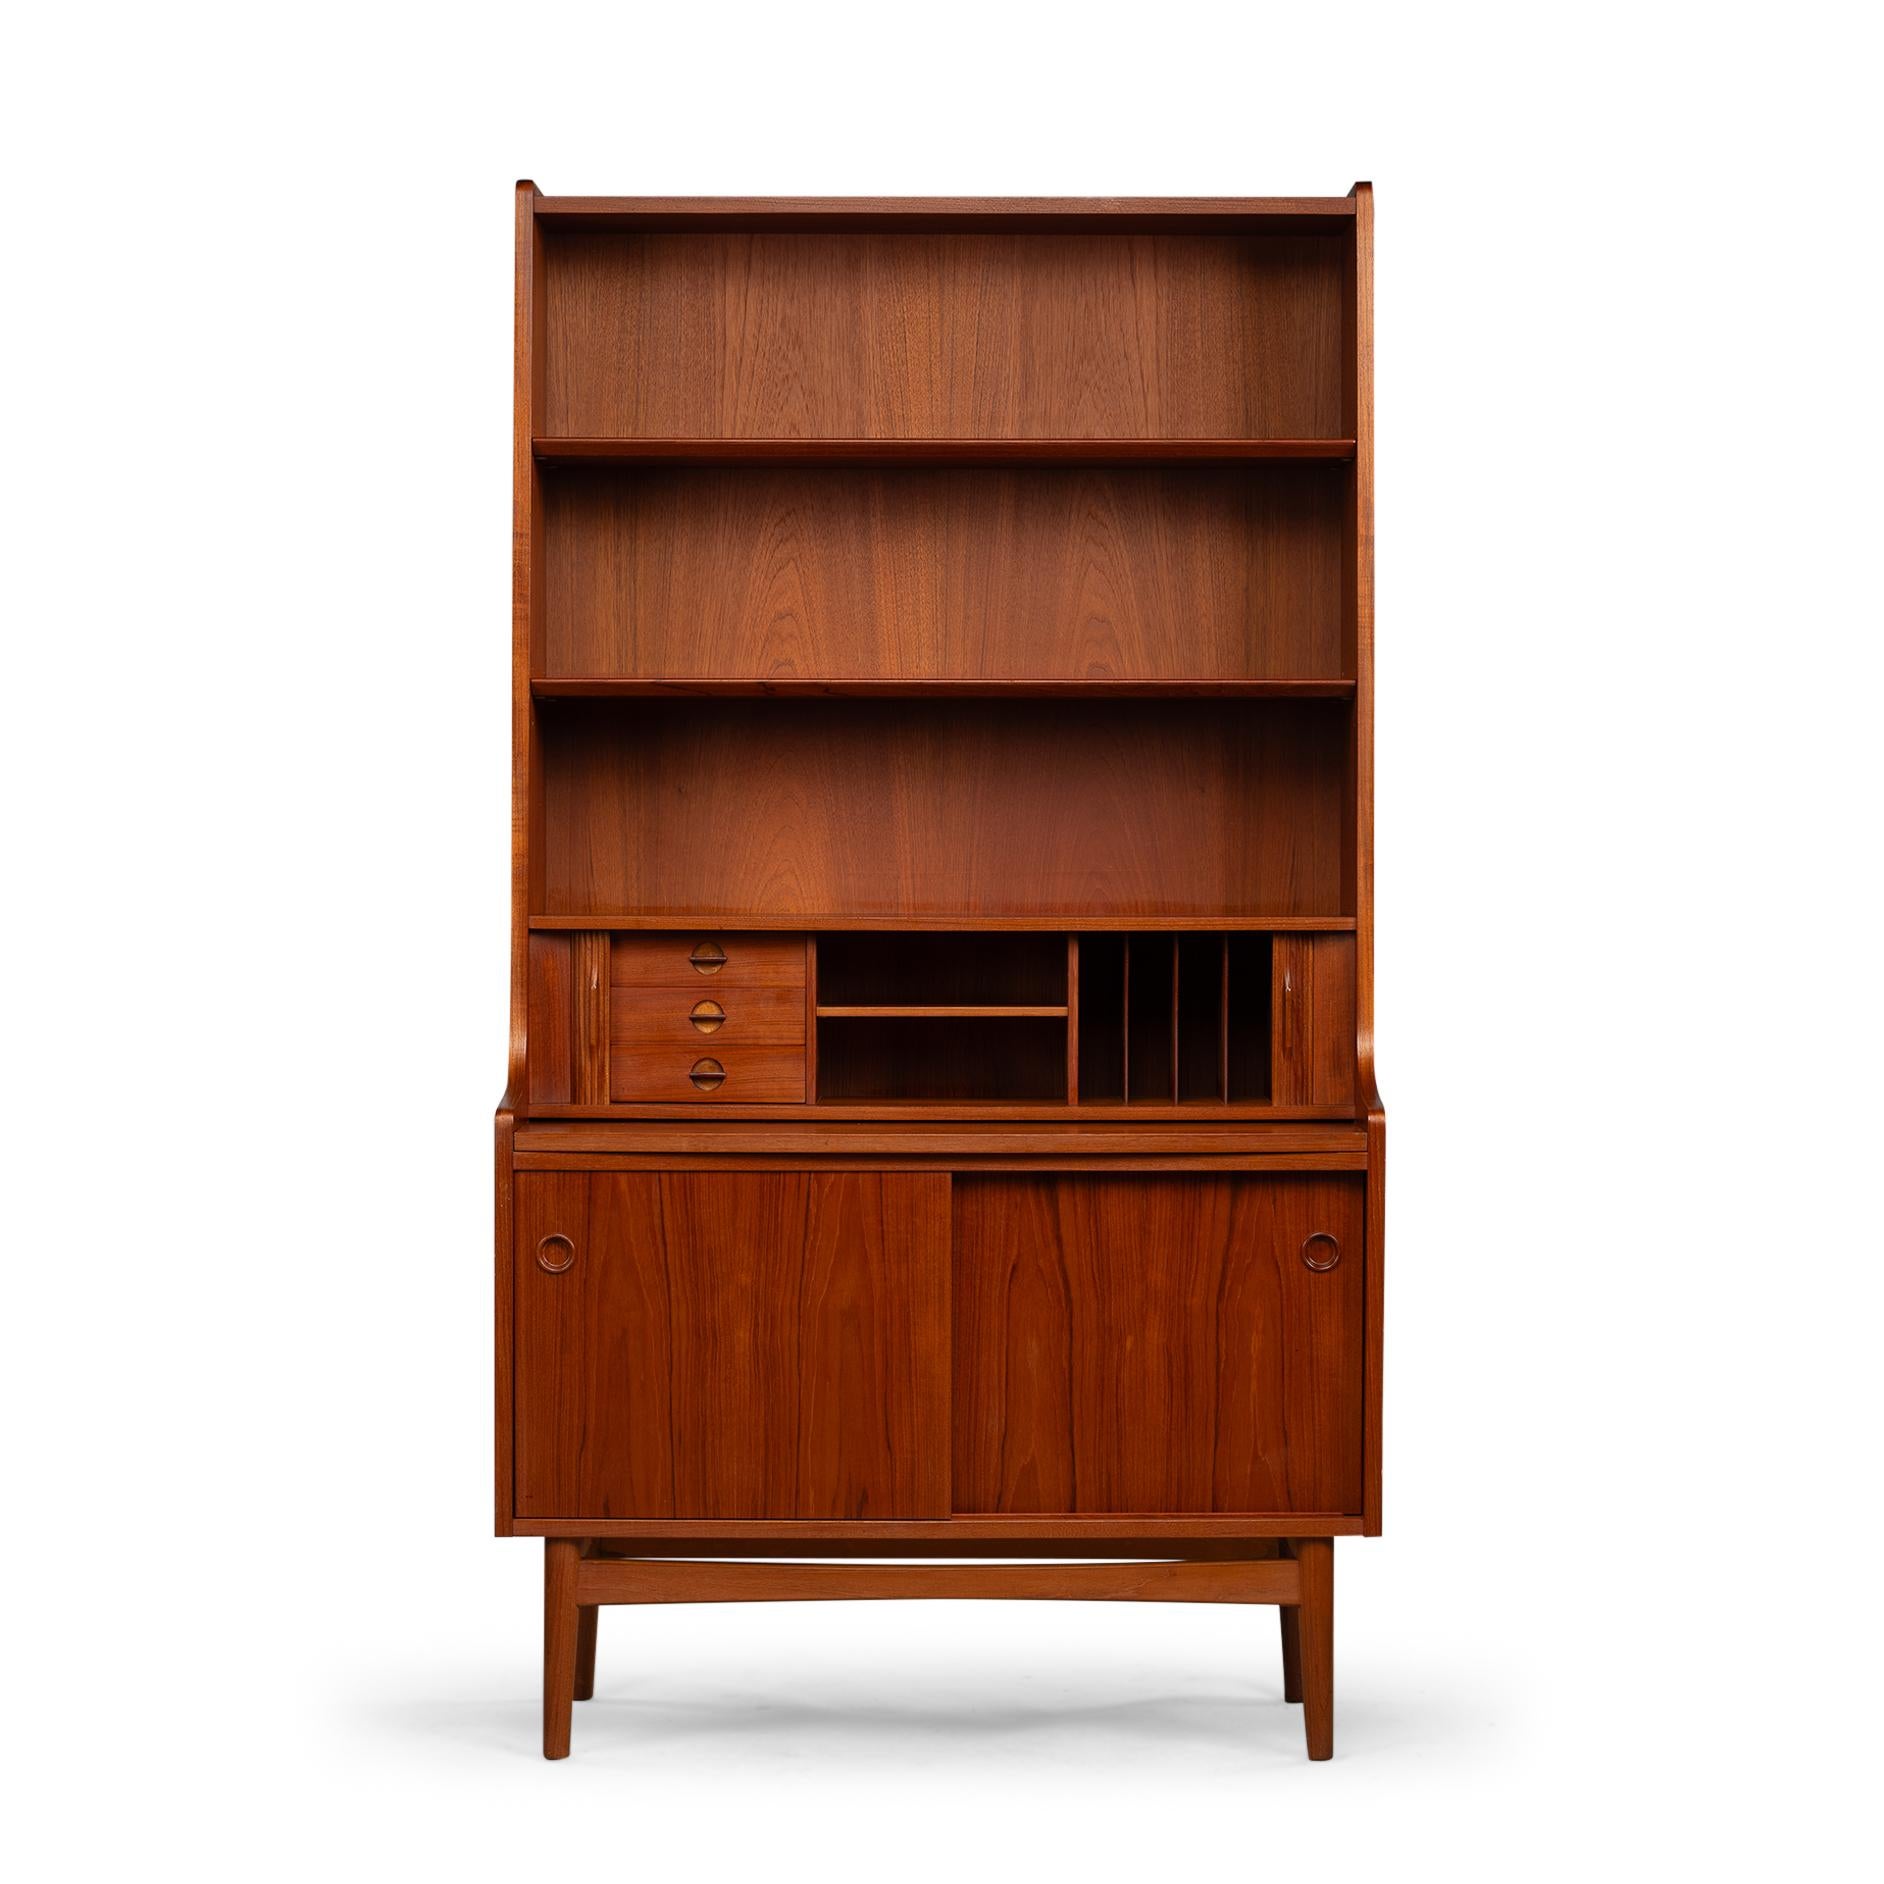 Danish Design Secretaire
This tall Danish chest of shelves with pull out desk is manufactured Bornholms Møbelfabrik  from a pressed wood teak veneer composite. Made late 60s the design by Johannes Sorth of this chest of shelves was aimed for city